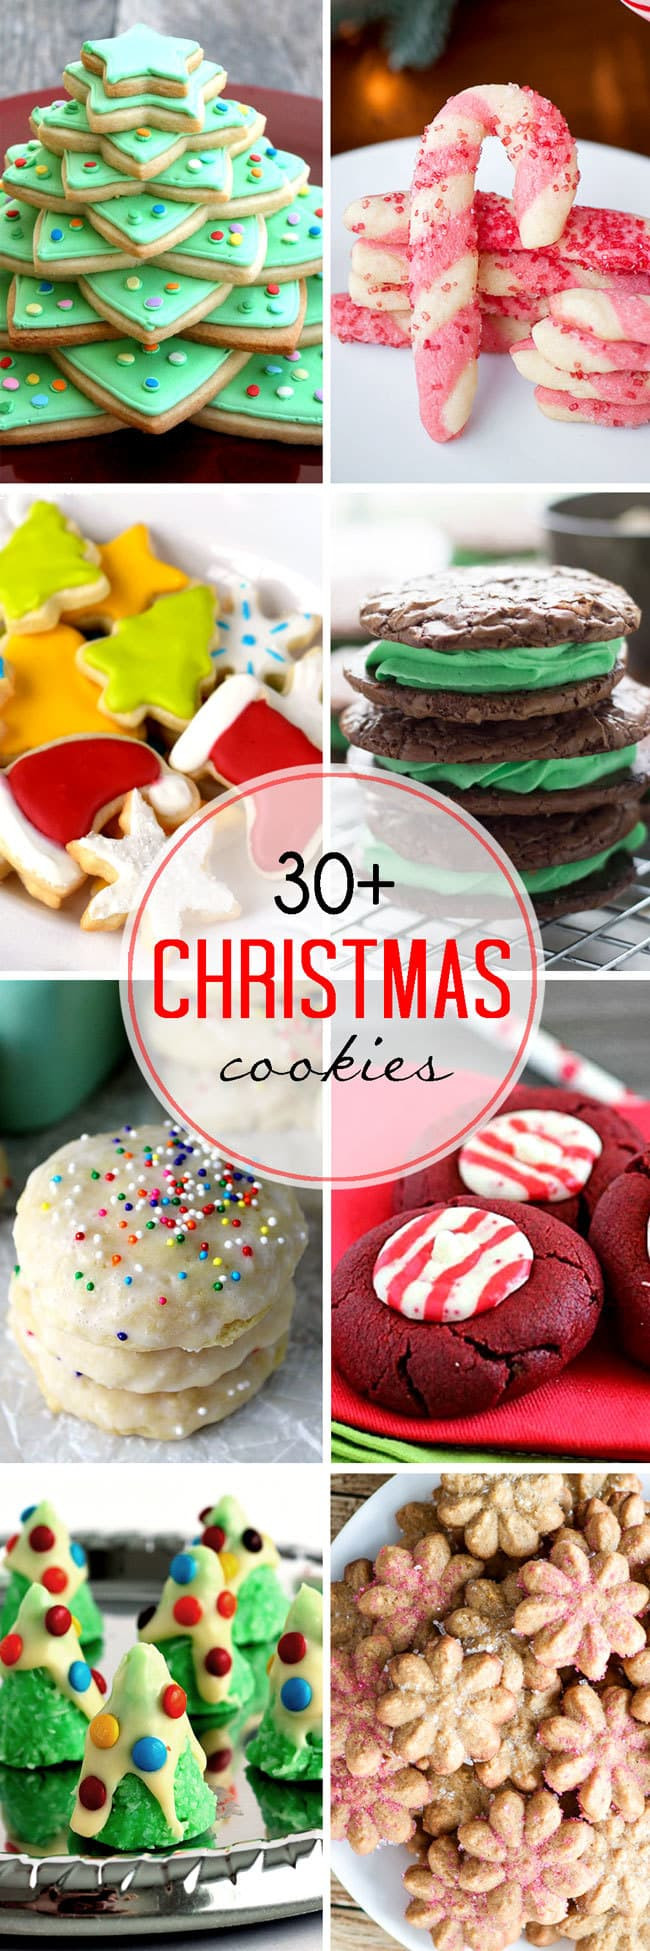 The Best Christmas Cookies
 Over 30 of the Best Christmas Cookies from Your Favorite